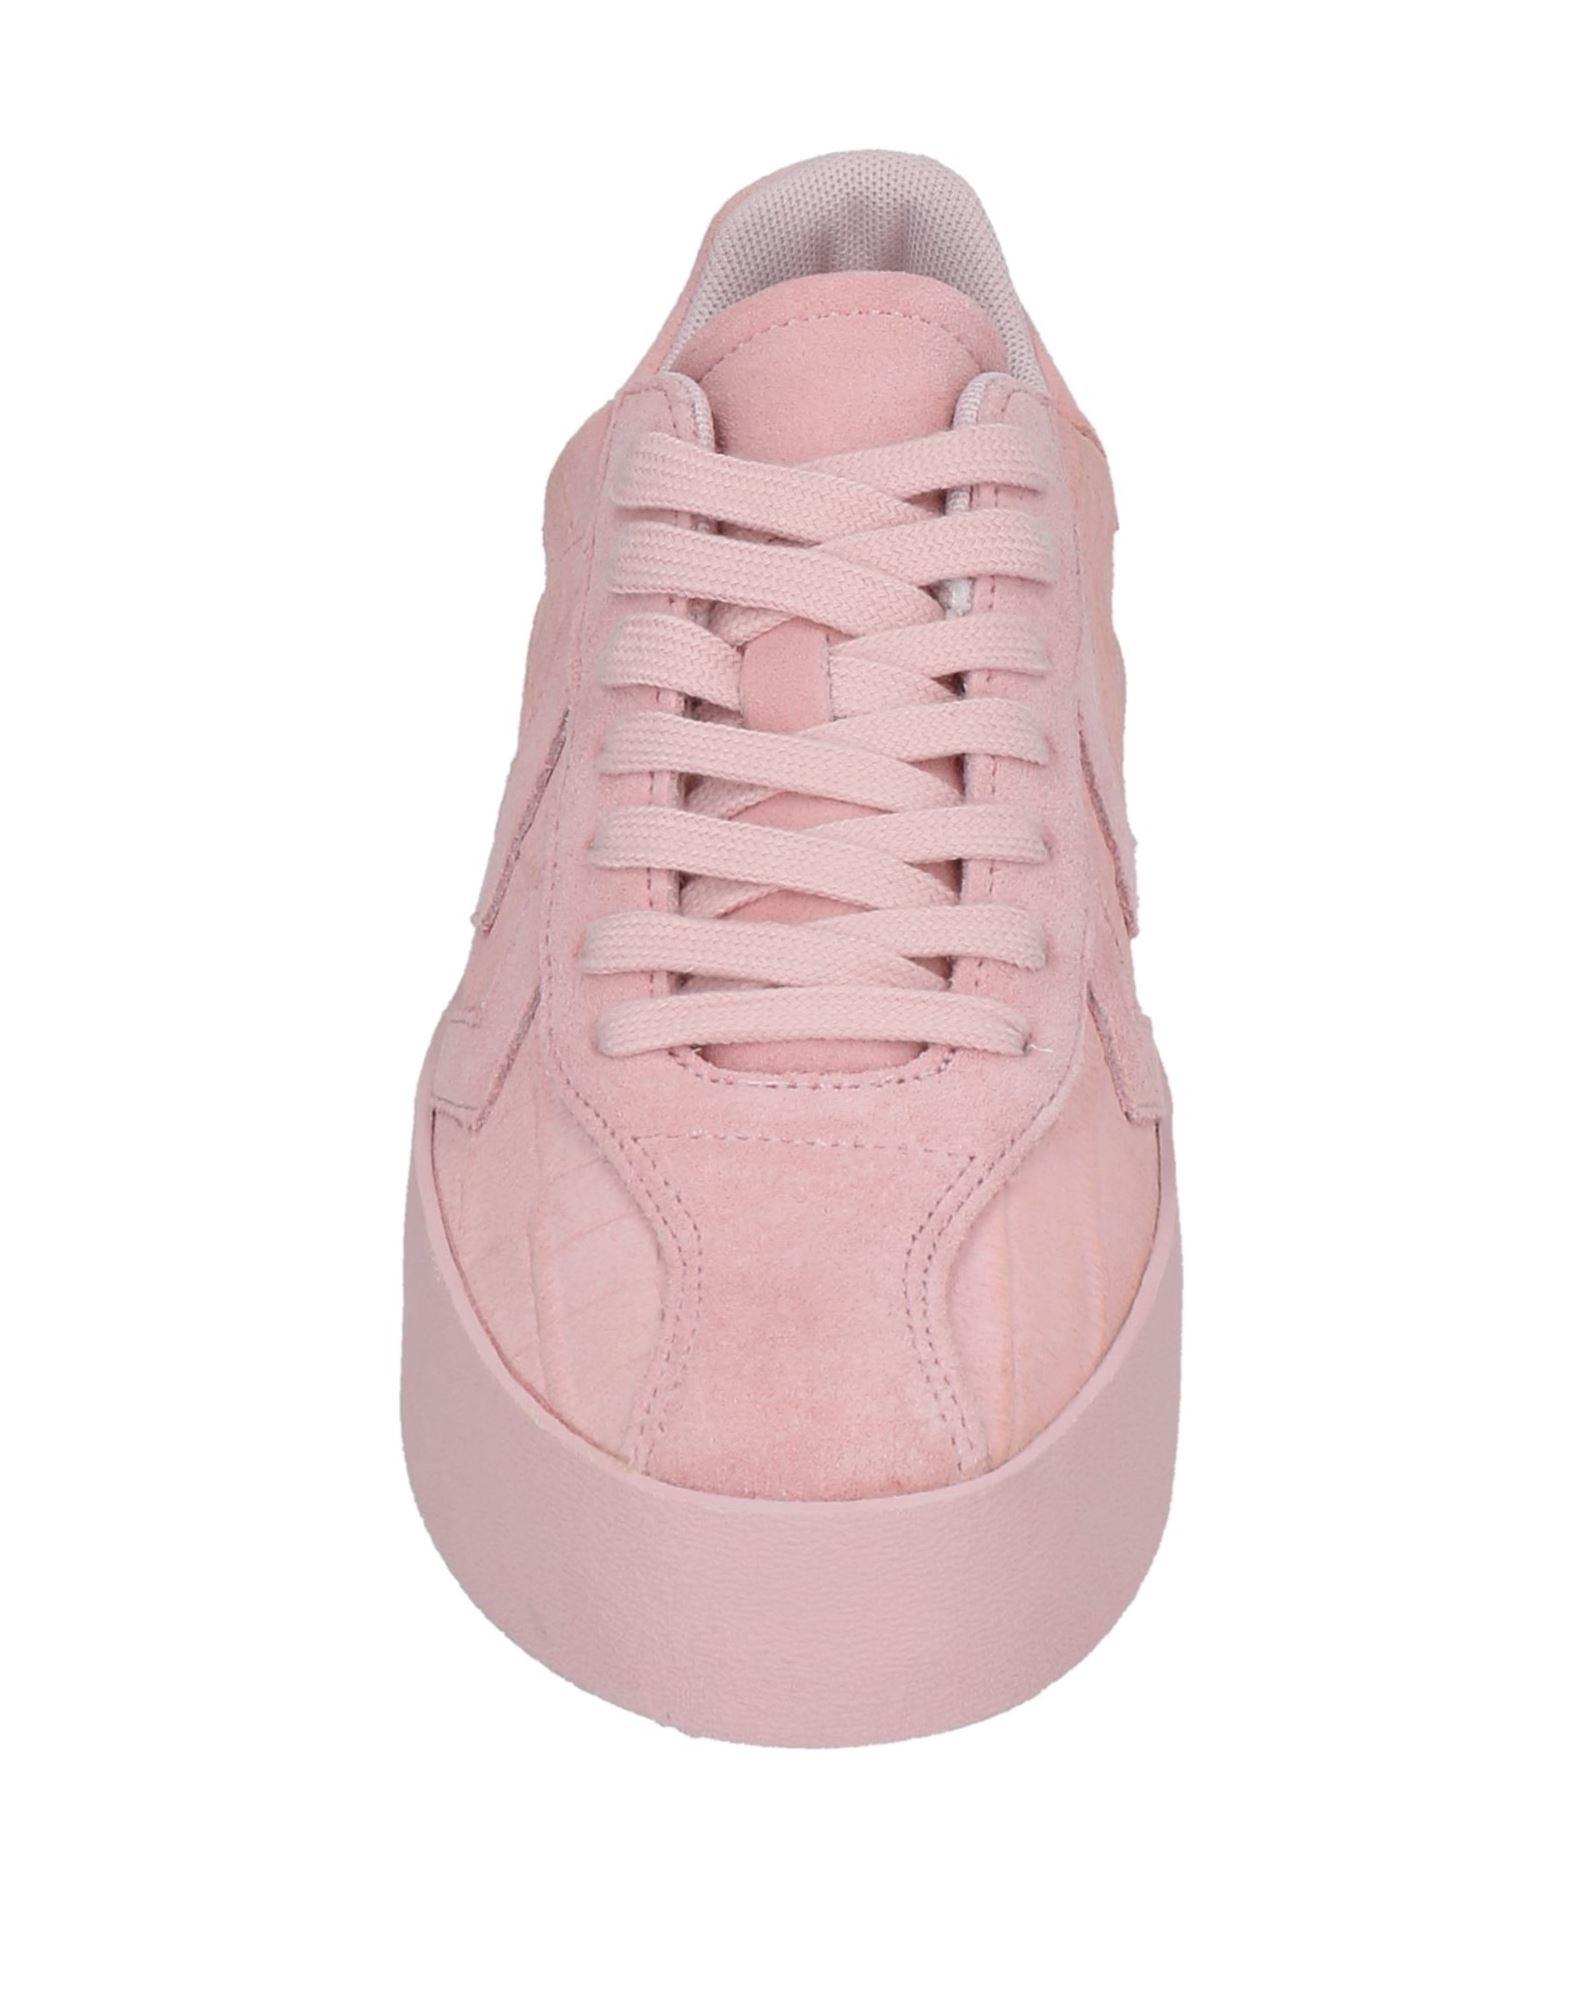 Hummel Leather Trainers in Pink - Lyst